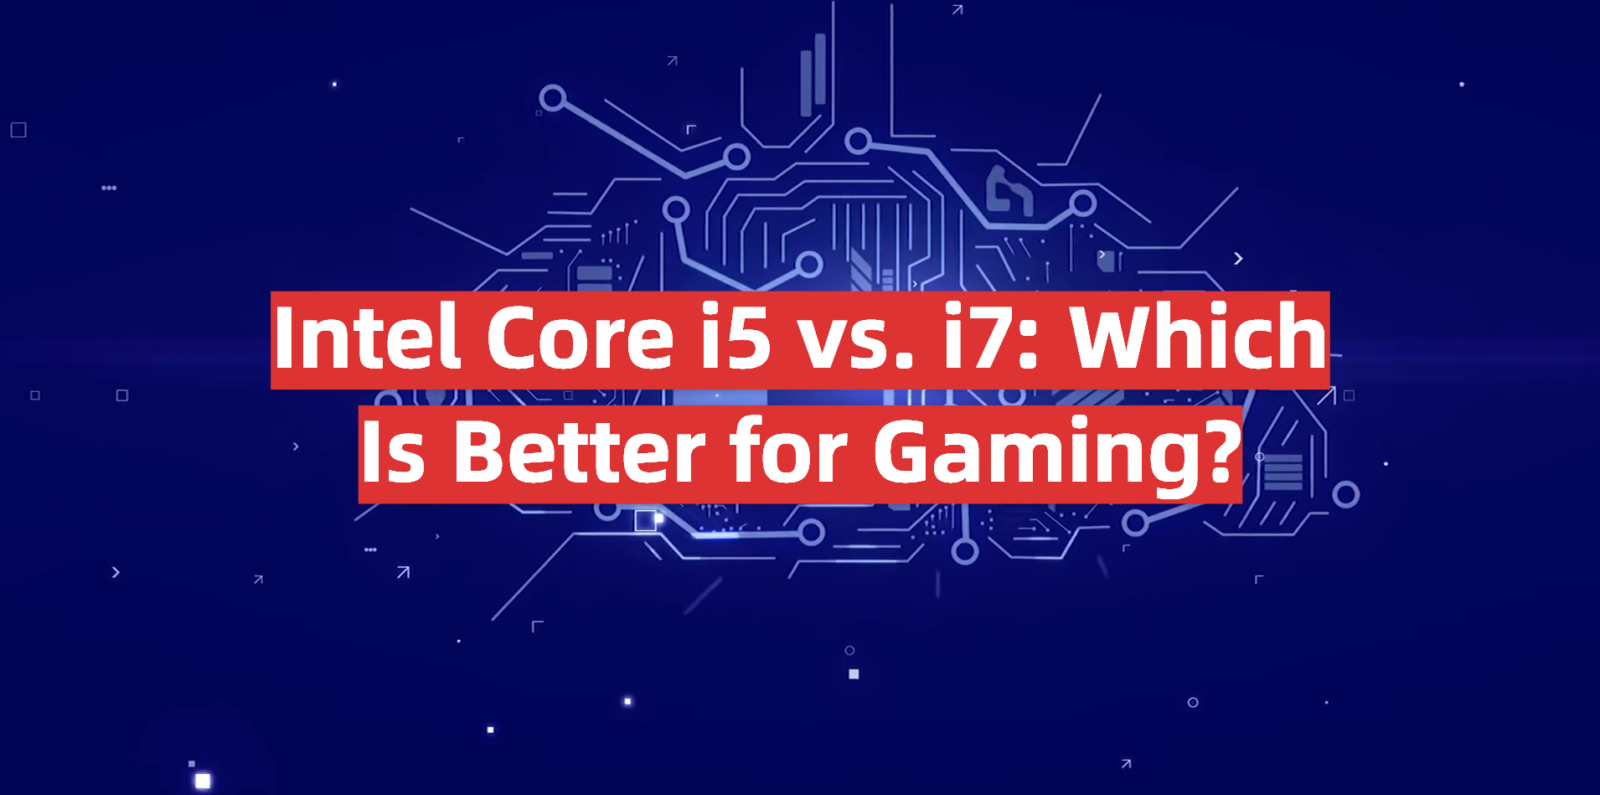 Intel Core i5 vs. i7: Which Is Better for Gaming?